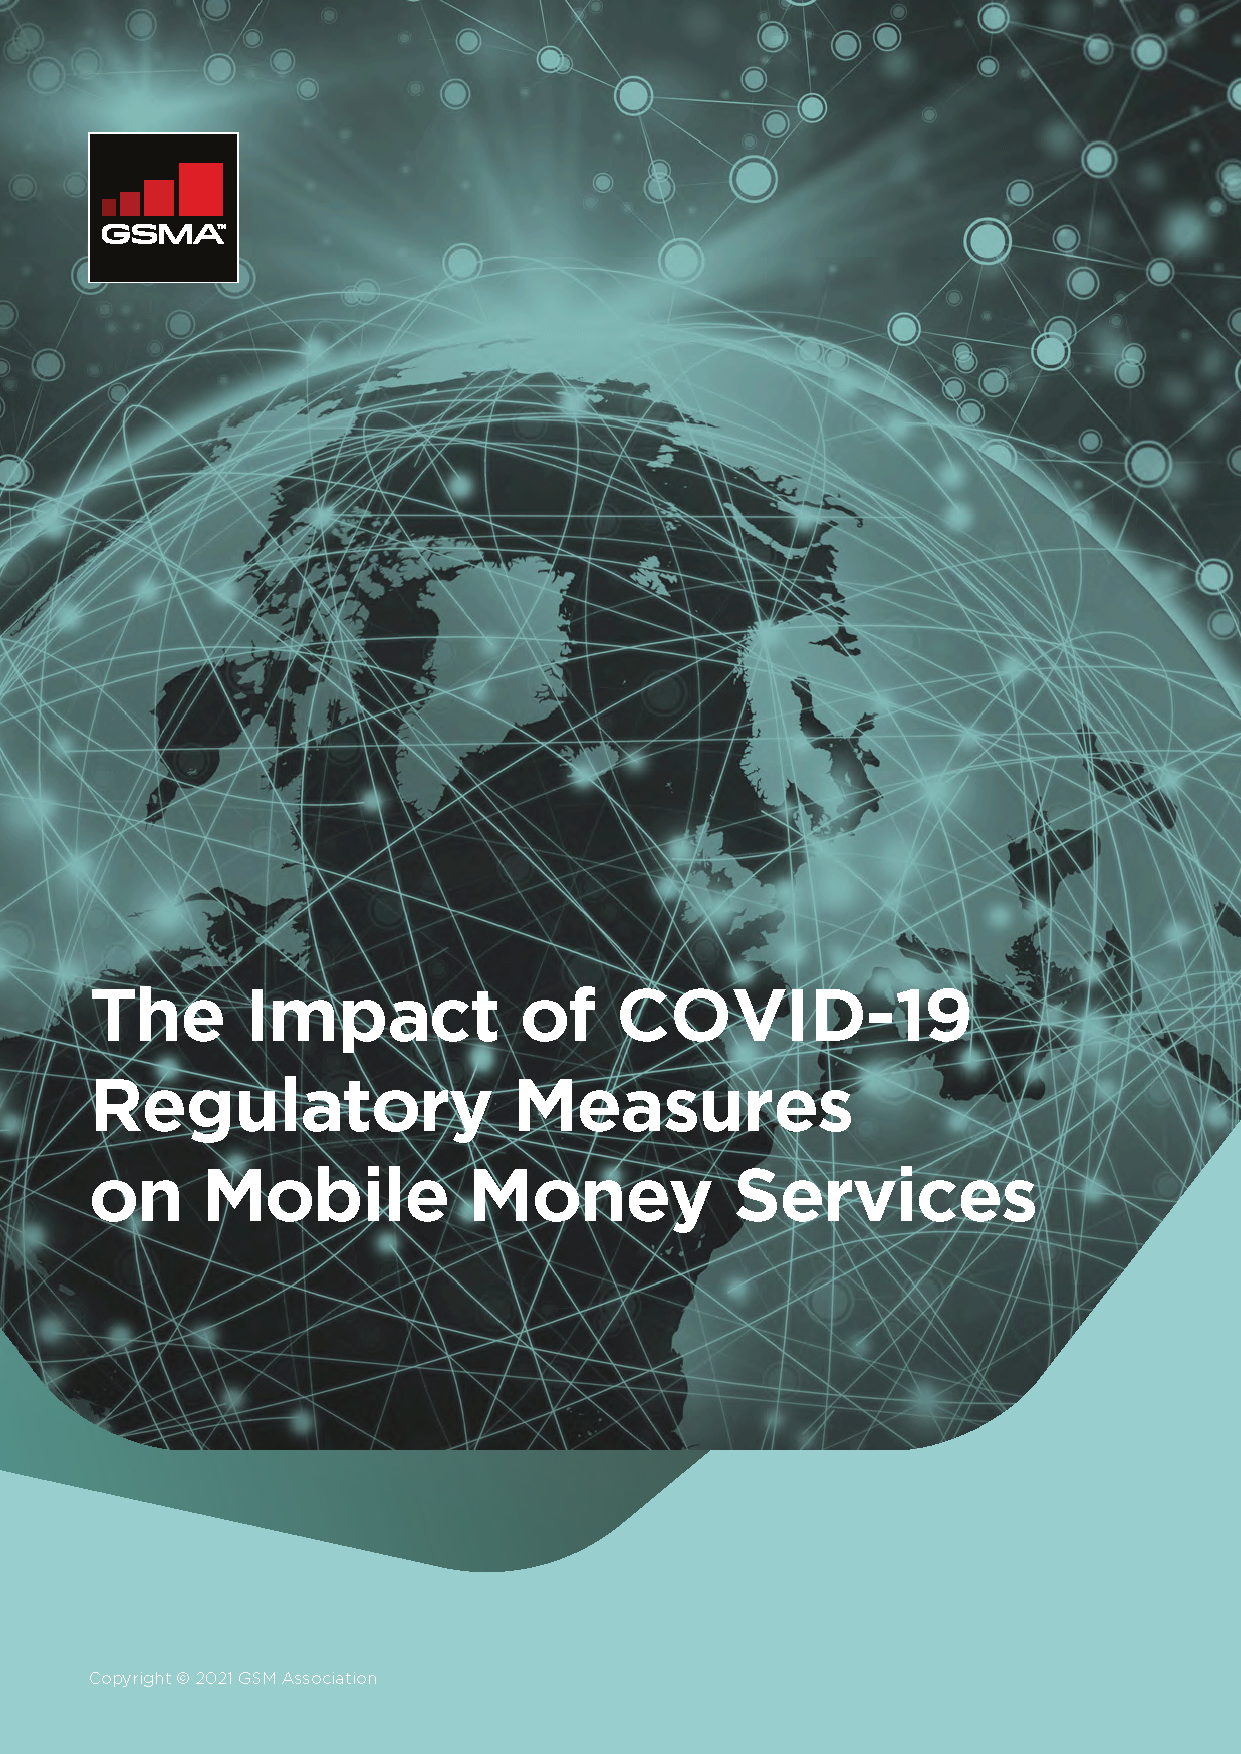 The Impact of COVID-19 Regulatory Measures on Mobile Money Services image